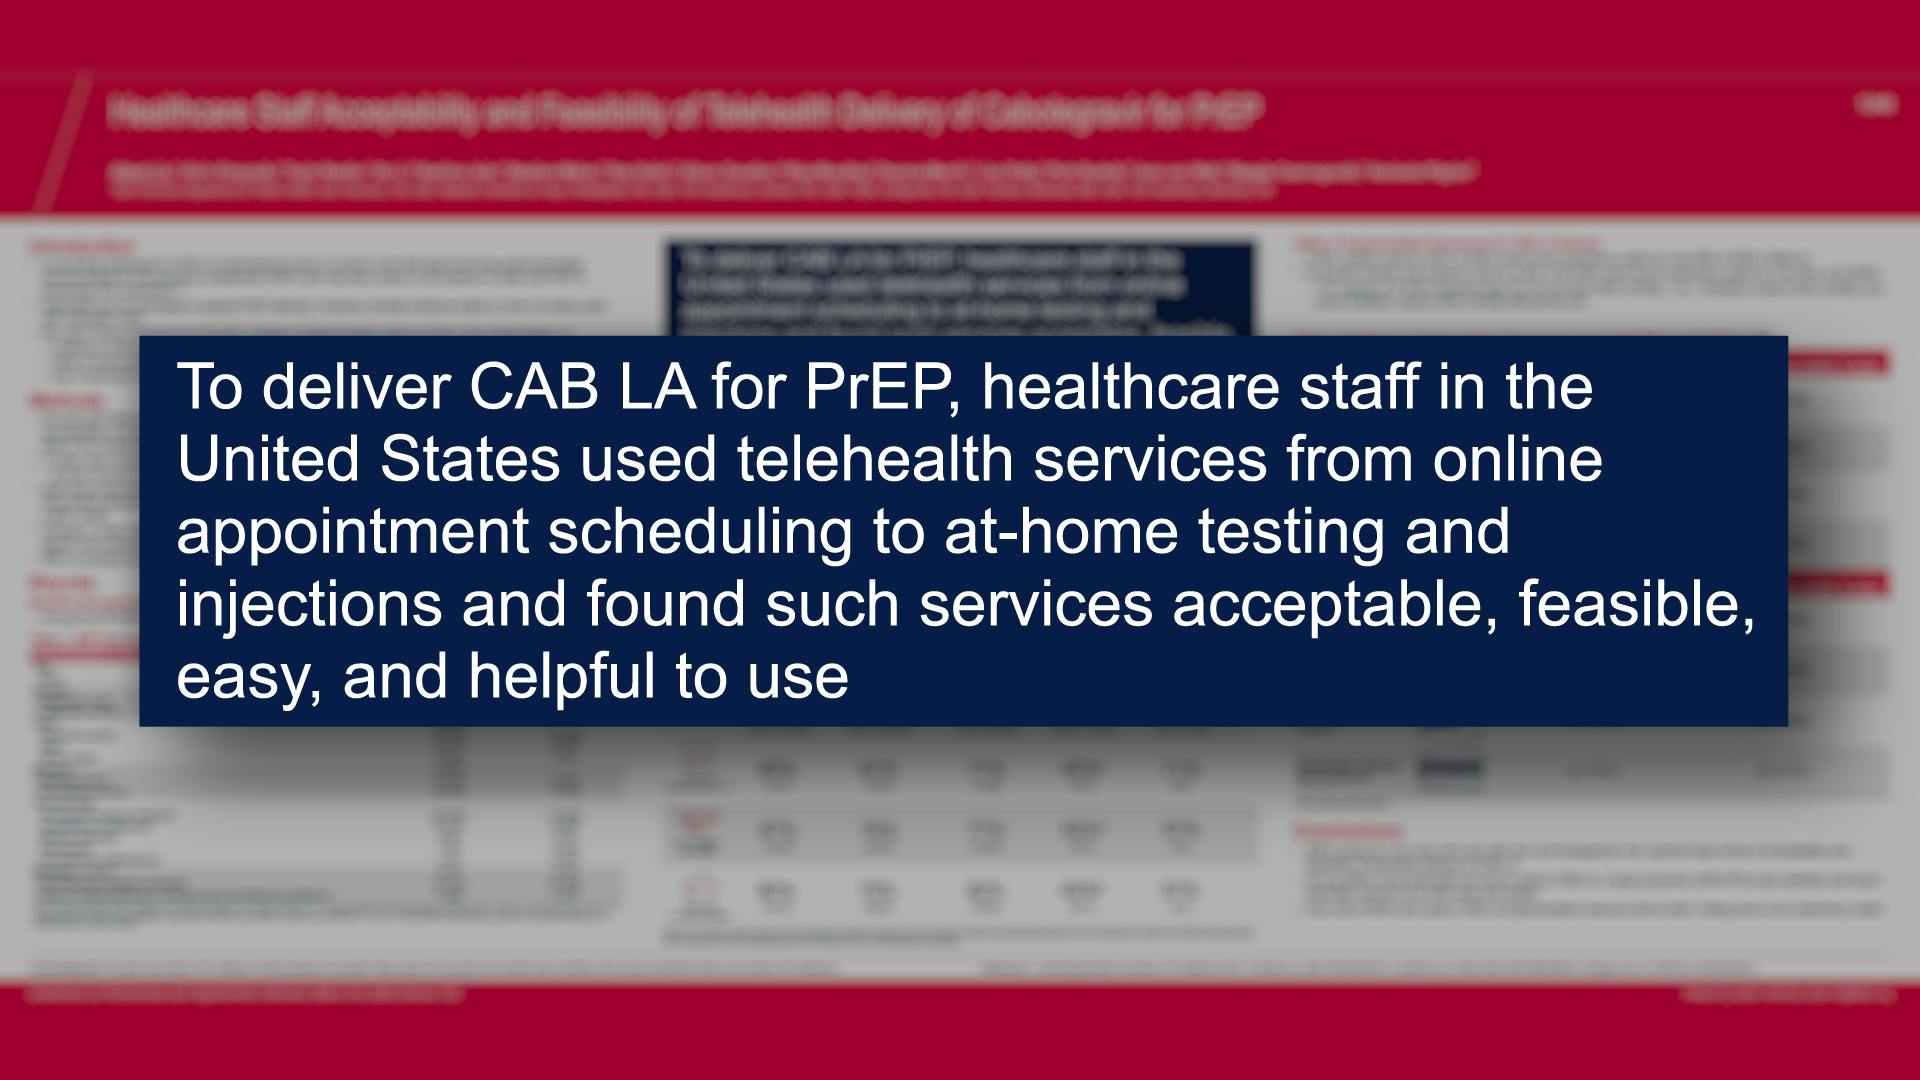 To deliver CAB LA for PrEP, healthcare staff in the United States used telehealth services from online appointment scheduling to at-home testing and injections and found such services acceptable, feasible, easy, and helpful to use